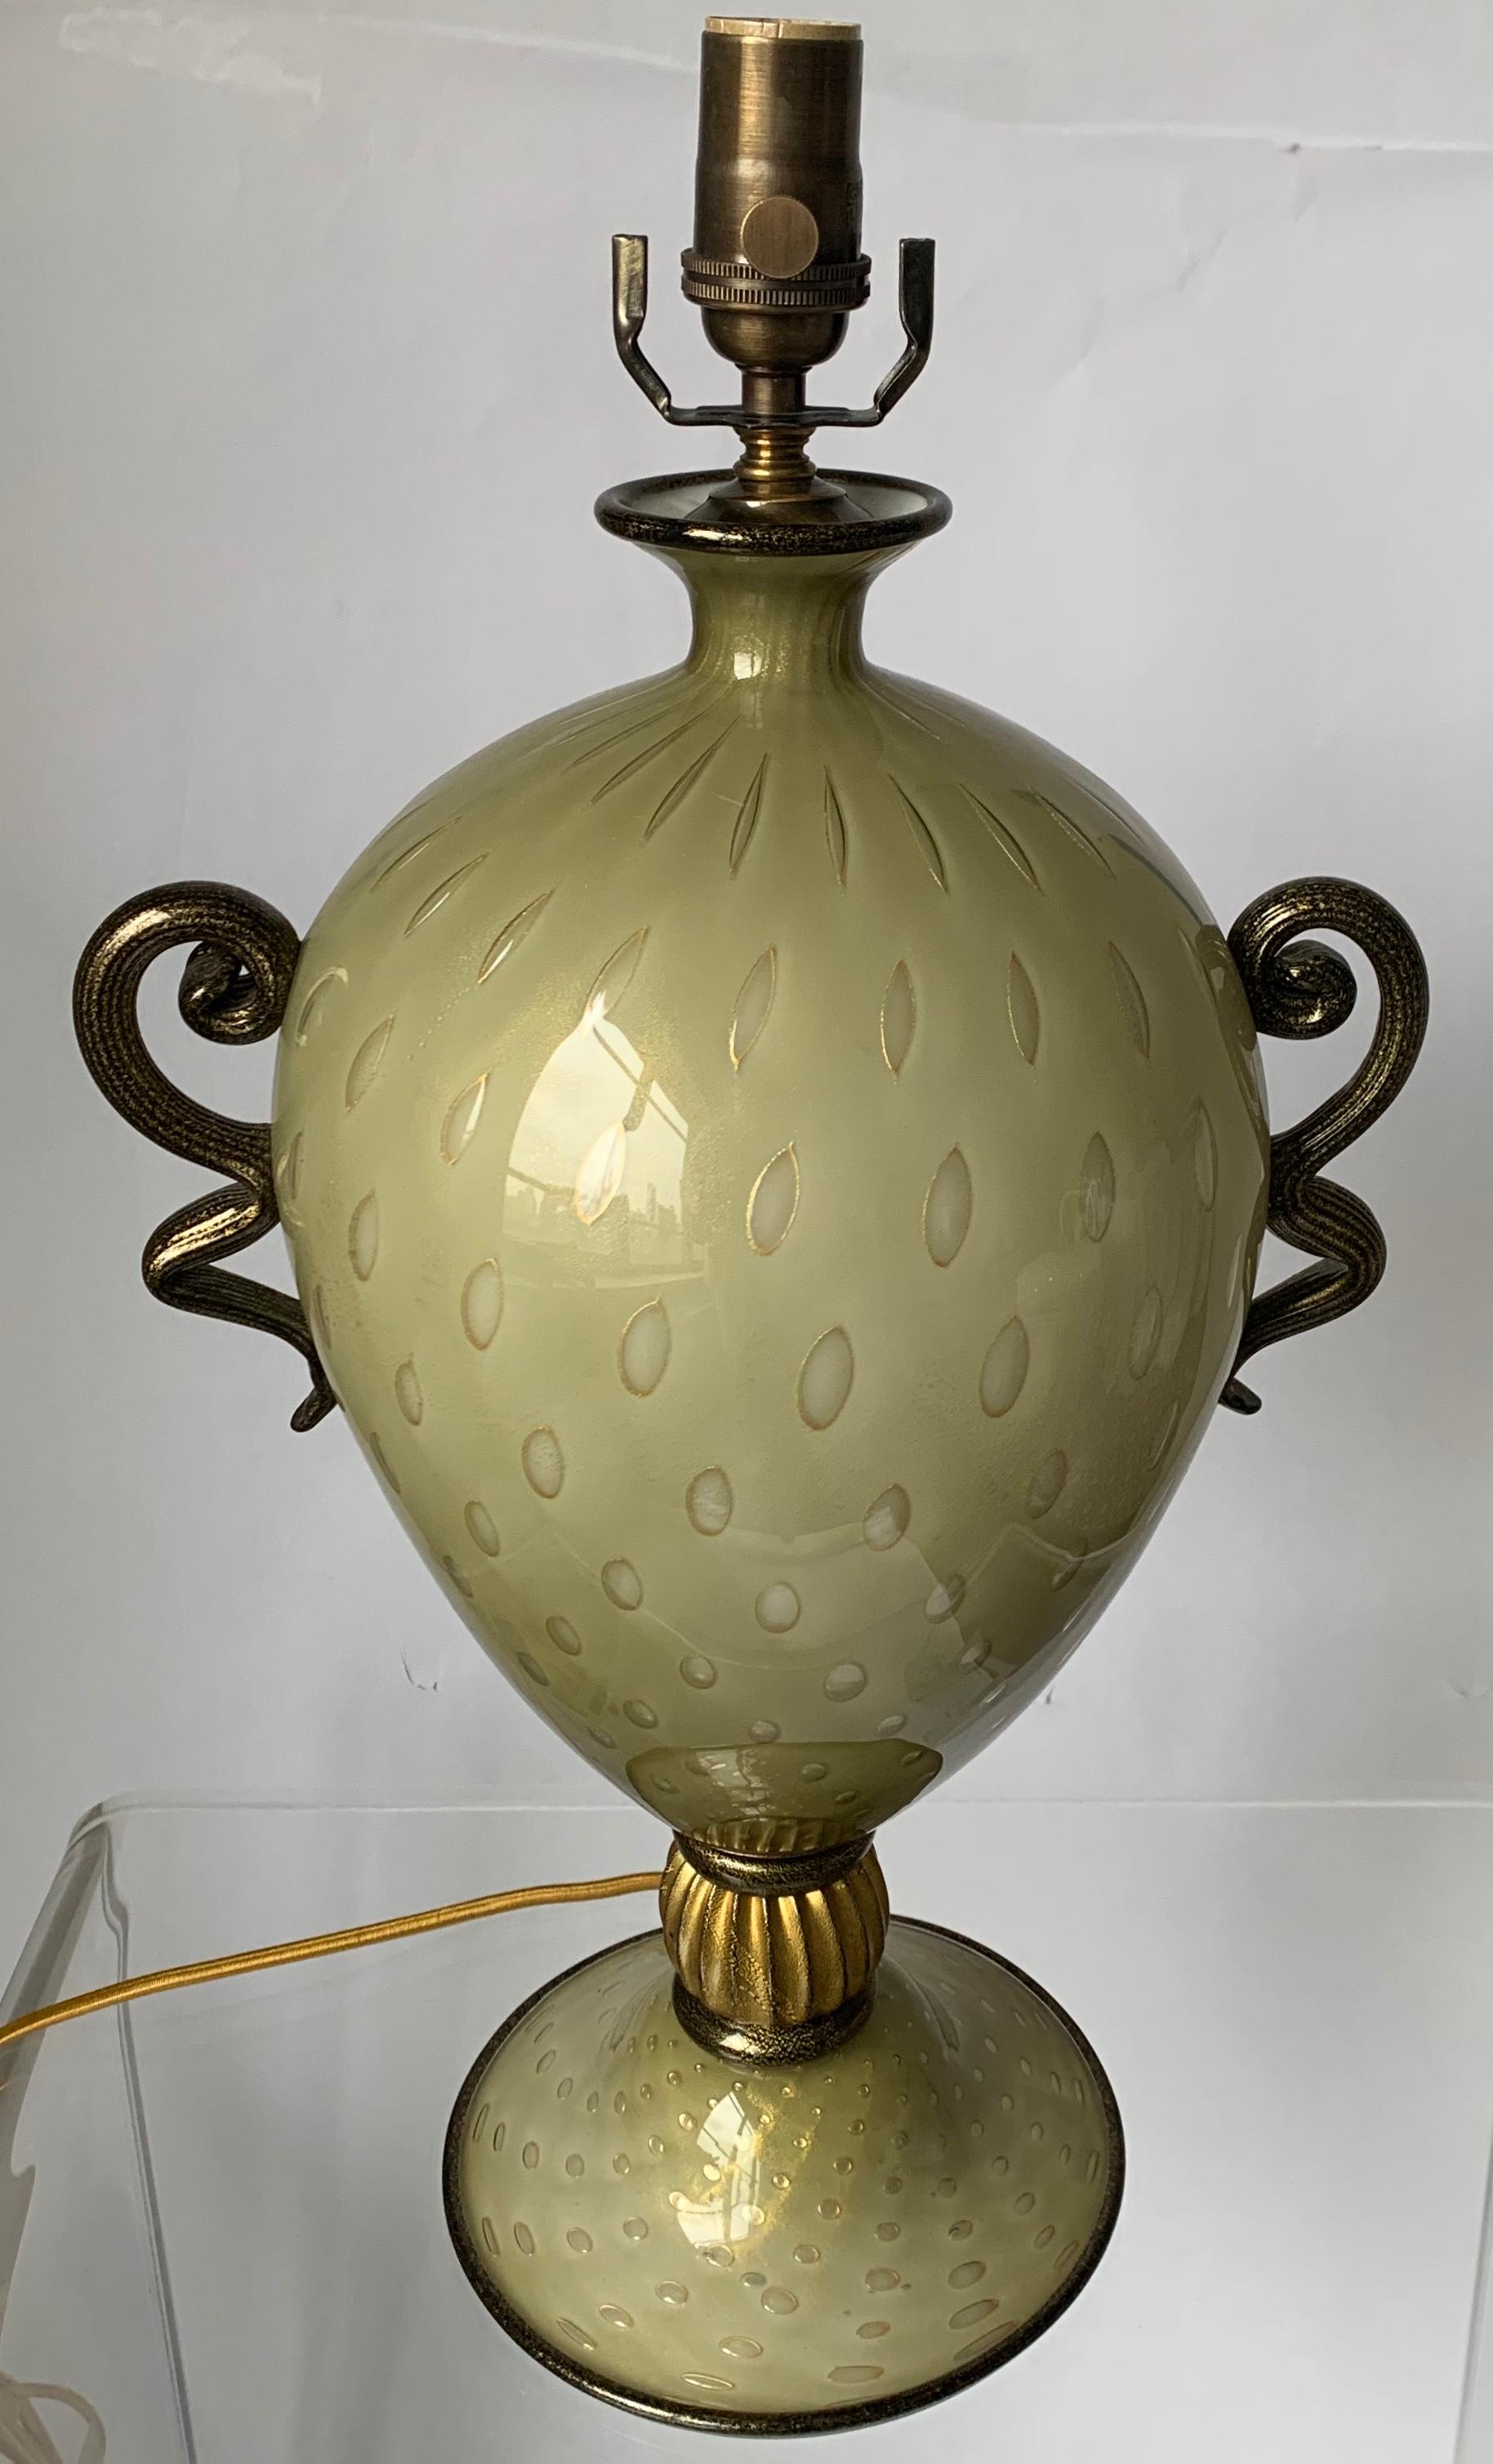 Large curvy Murano glass lamp. Green blown glass with all over bullicante (controlled bubbles) and gold flecked detailing. Black blown glass with gold flecks detailing. Newly rewired with silk cord. Takes one standard bulb (not included). Lampshade